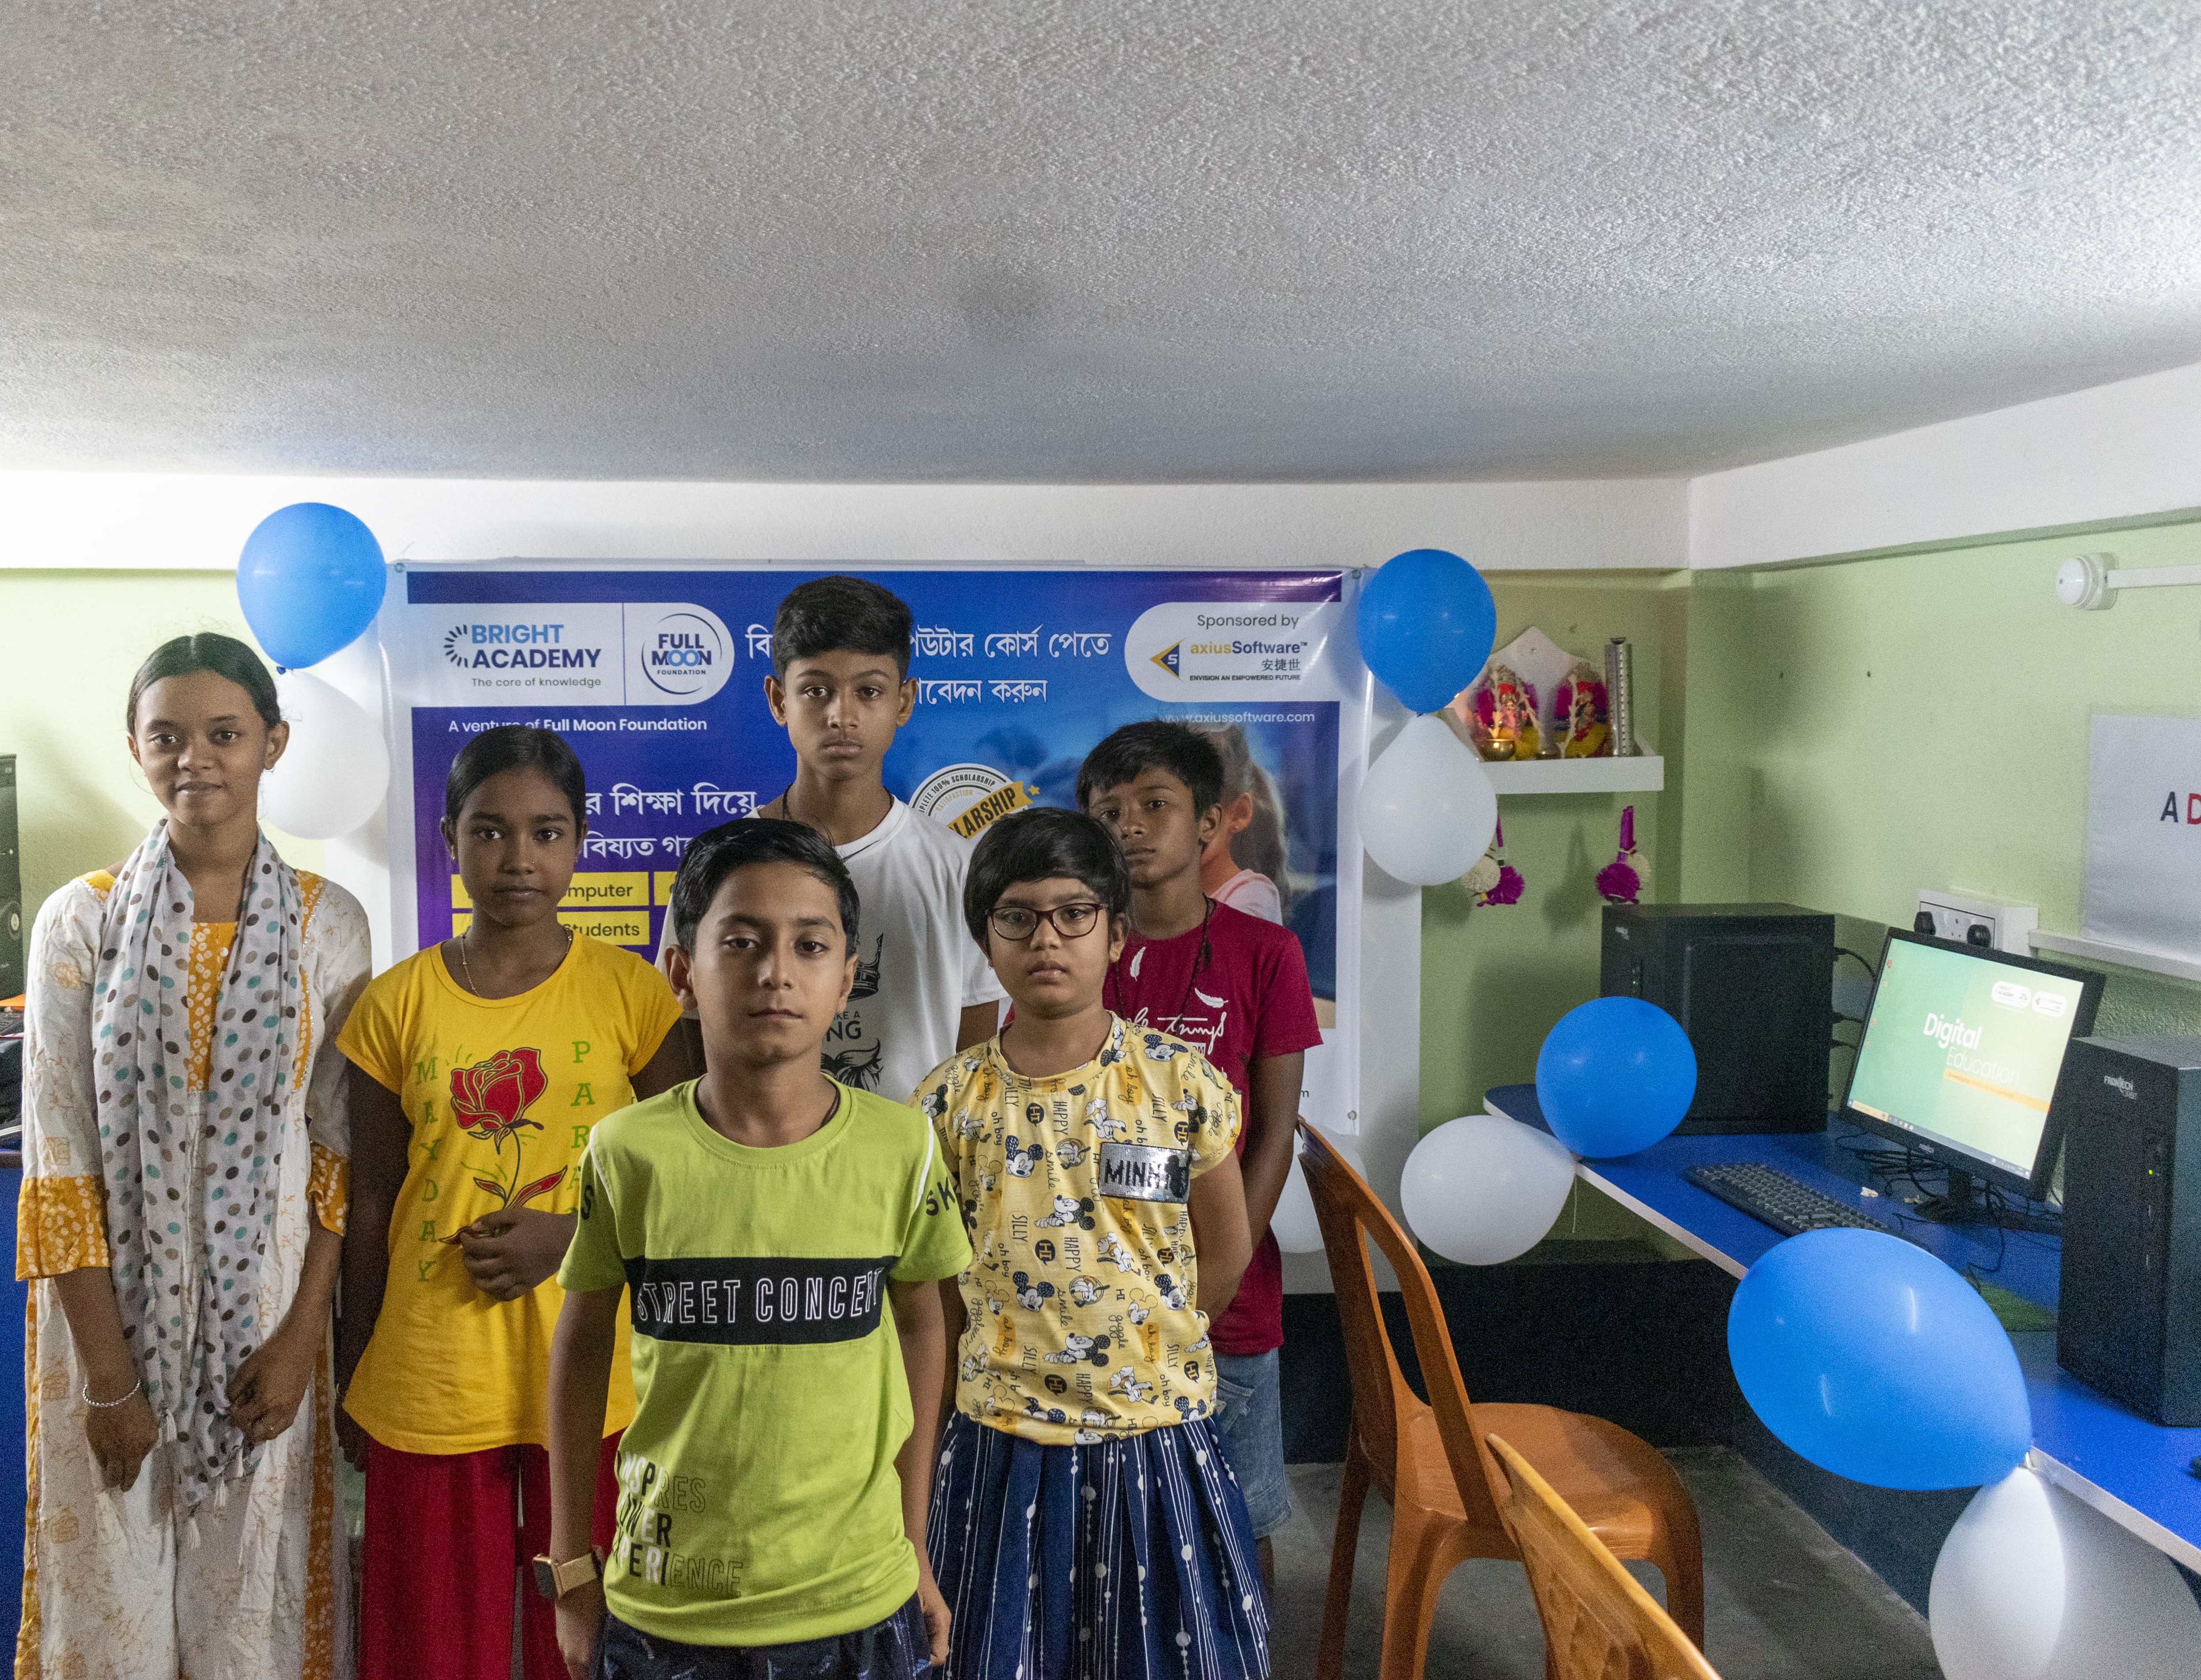 axiusSoftware collaborates with Local NGO to Launch Free Computer Education for Needy Children in Kolkata, India